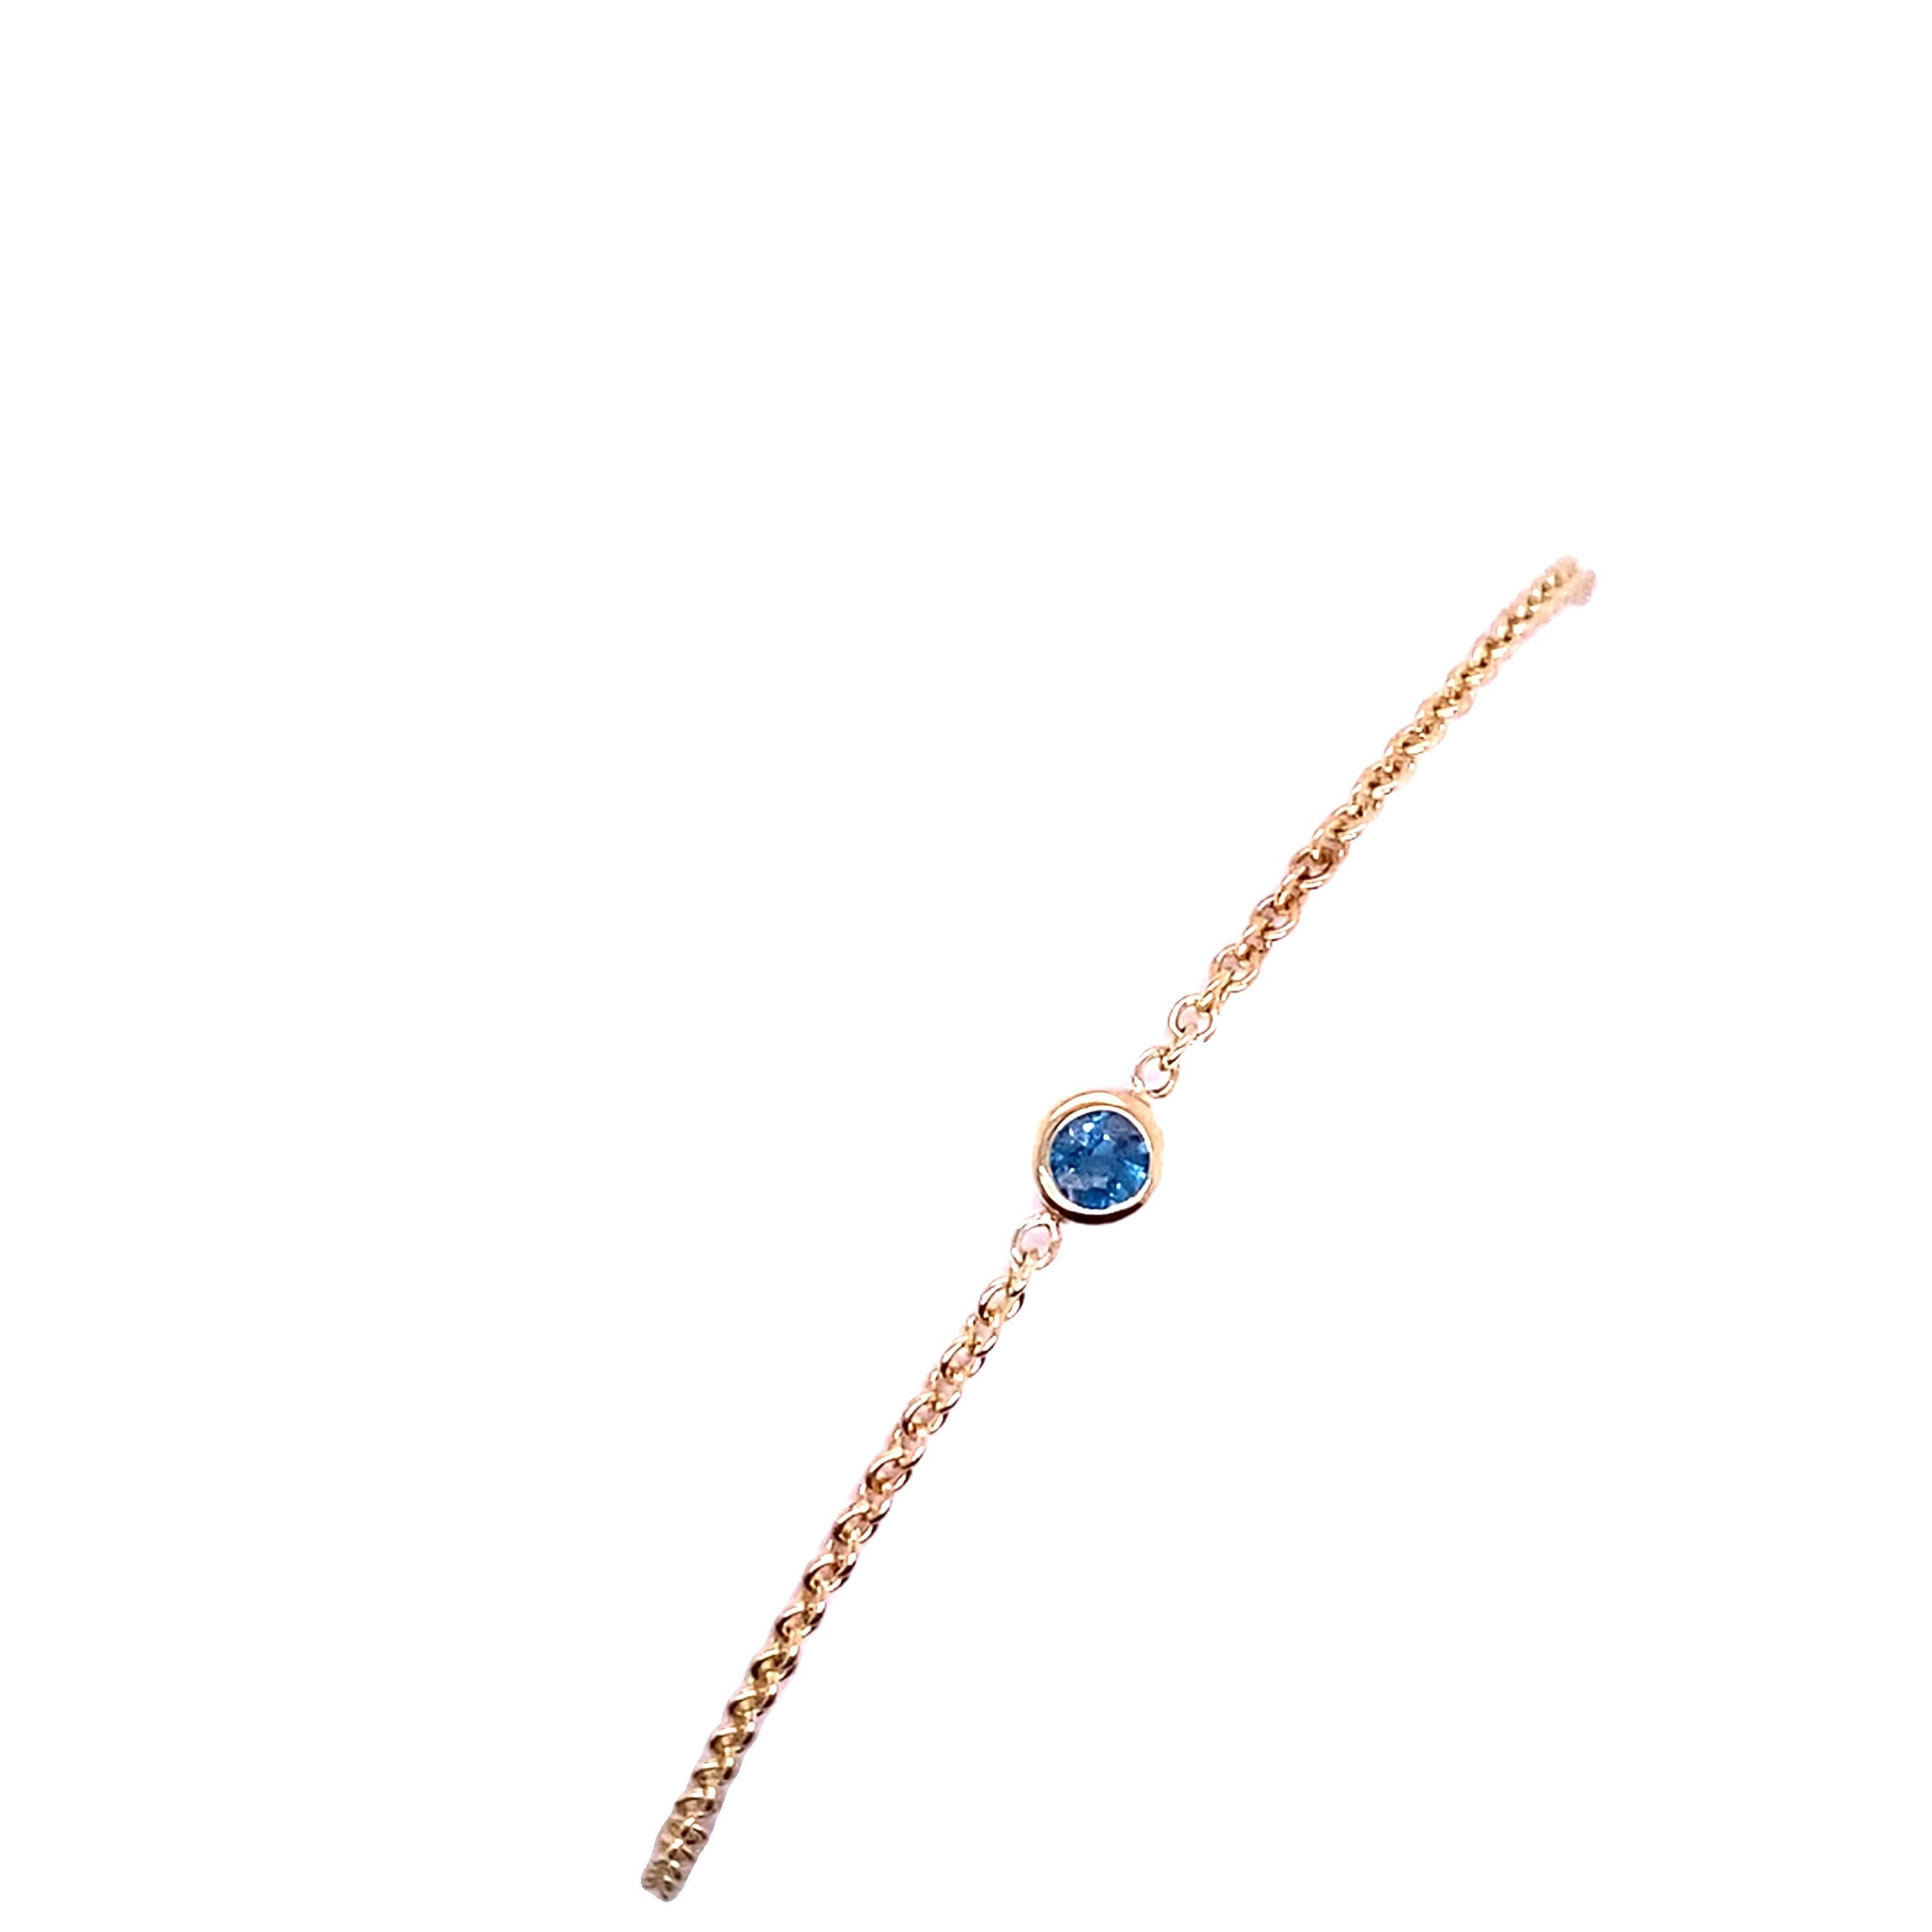 Round Cut December Birthstone Bracelet Set with 0.11ct Round Blue Topaz in 9ct Yellow Gold For Sale